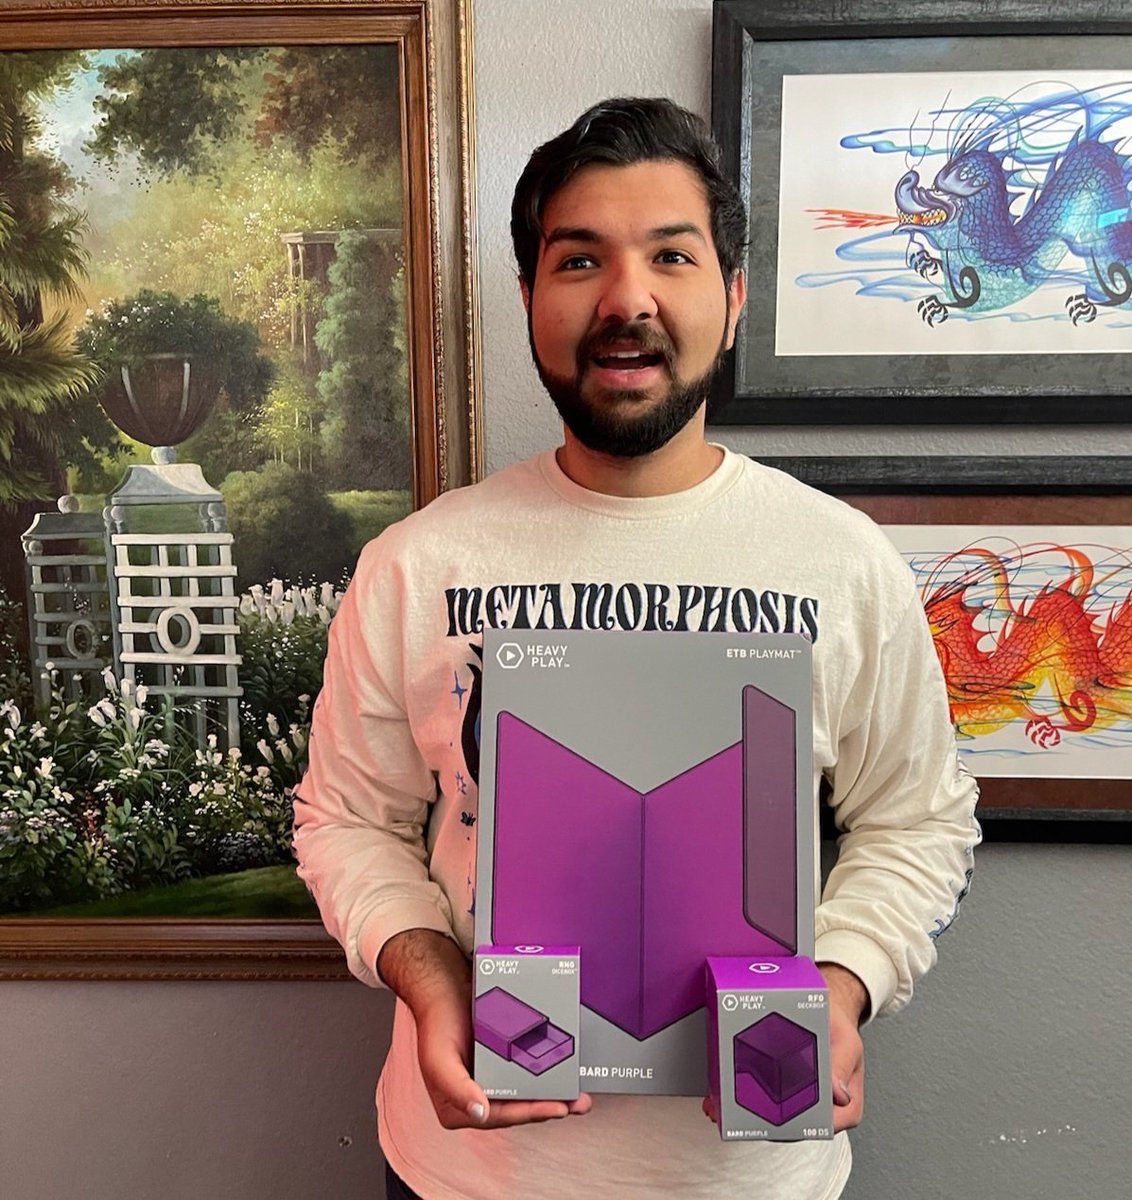 GIVEAWAY TIME 🥳🥳🥳 ONE lucky winner will receive a new purple @HeavyPlayLLC Playmat, Deckbox and Dice Tray! 🔽🔽 To Enter 🔽🔽 -Like + Repost -Follow Me (@YungDingoMTG) and @HeavyPlayLLC -Follow me on Twitch (twitch.tv/YungDingo) Winner will be chosen 4/15 6pm EST! #ad